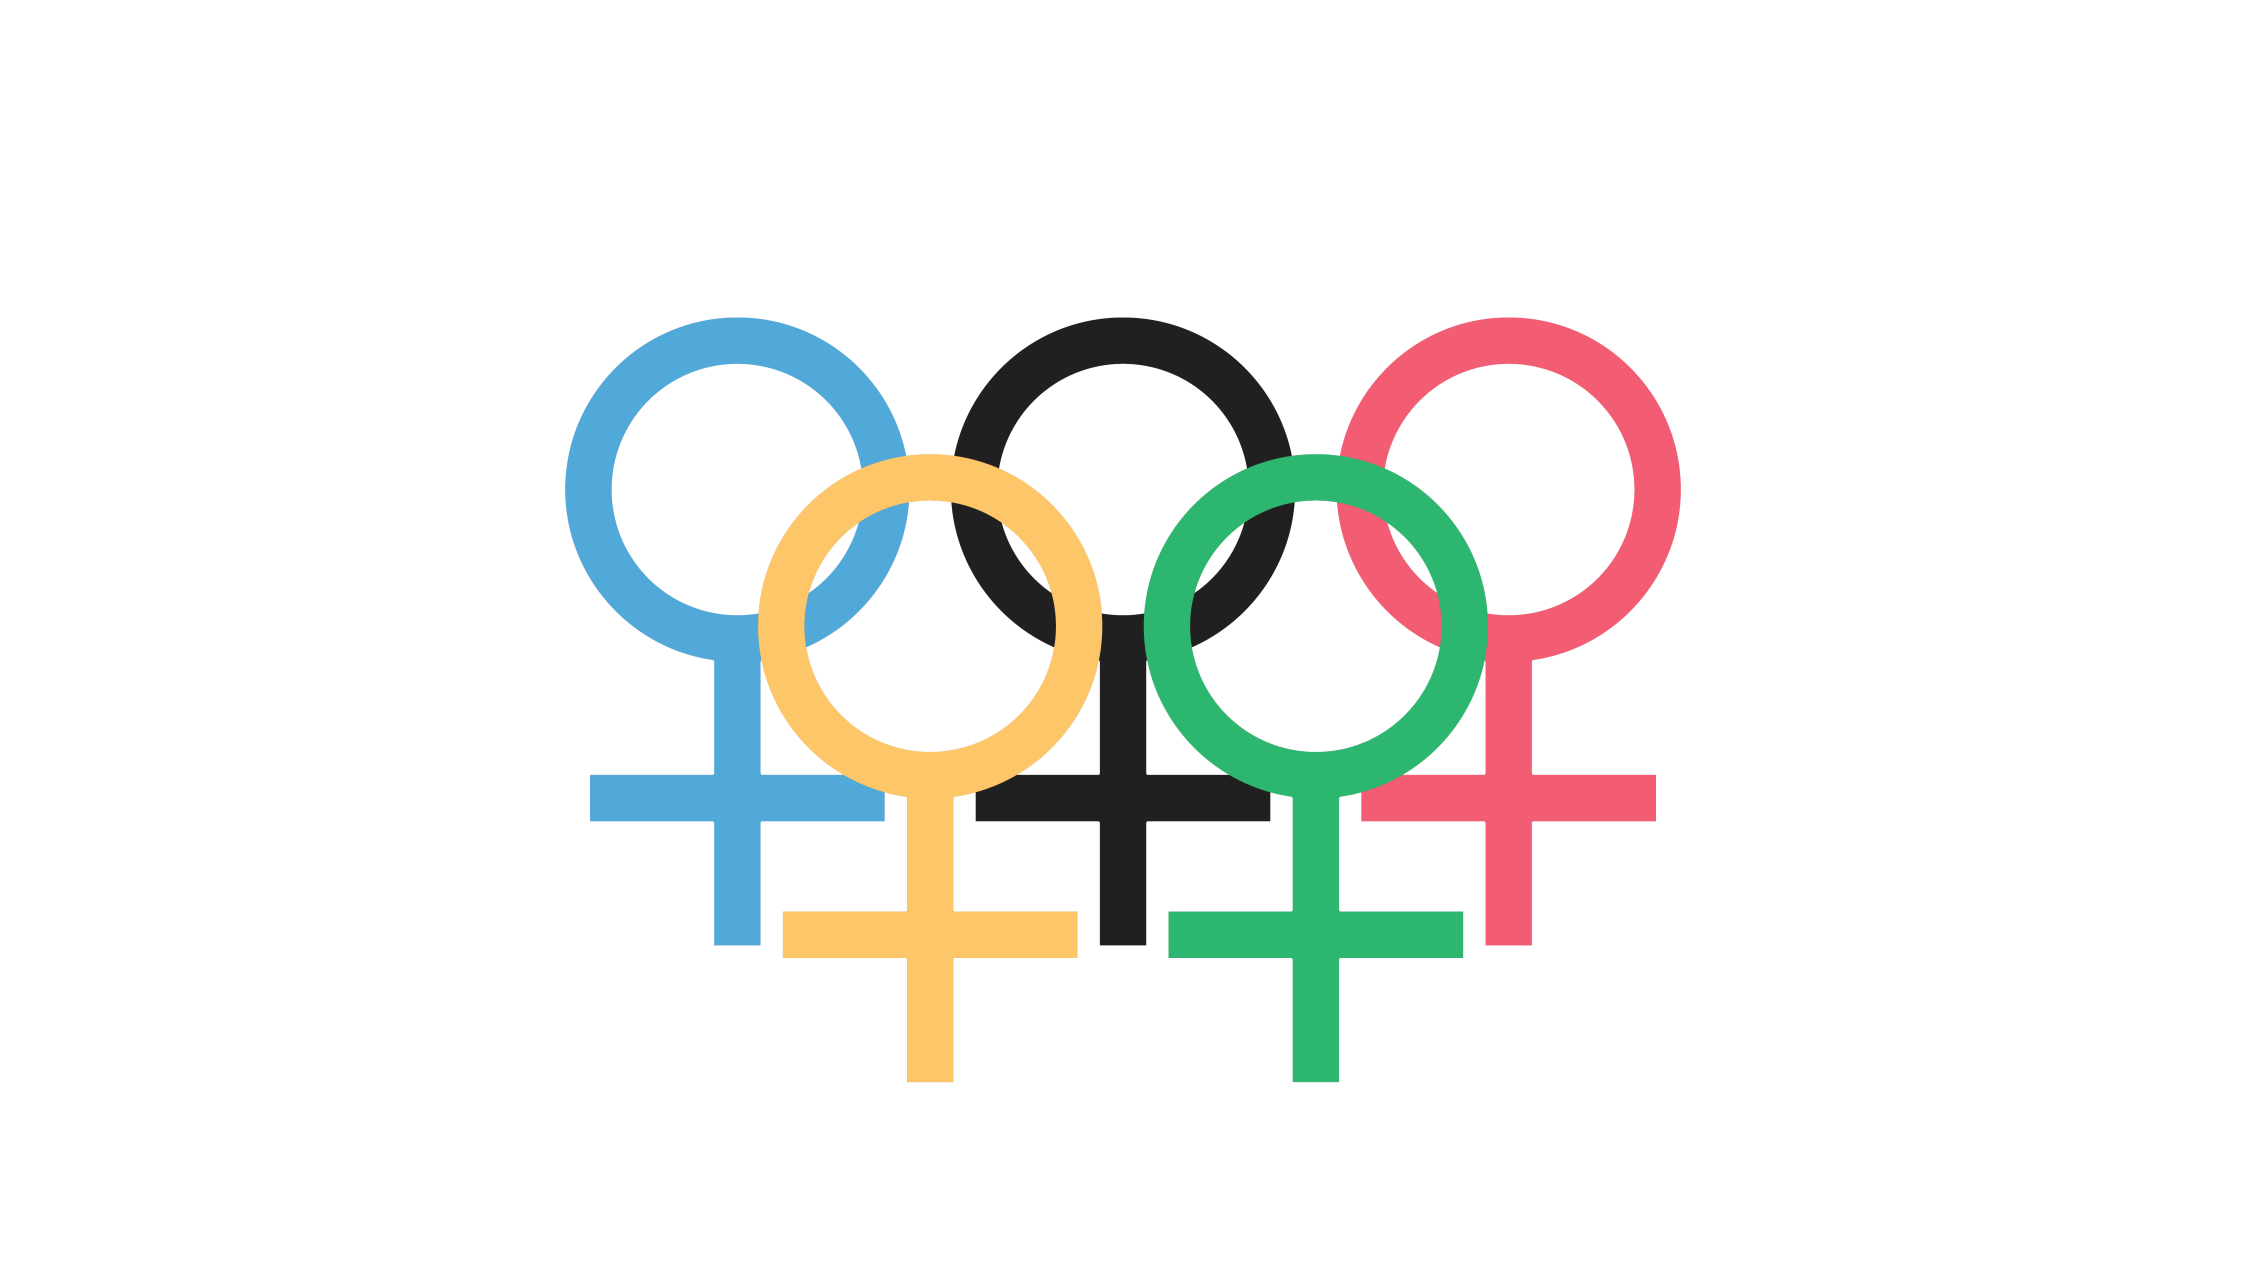 Olympic rings combined with female gender symbol